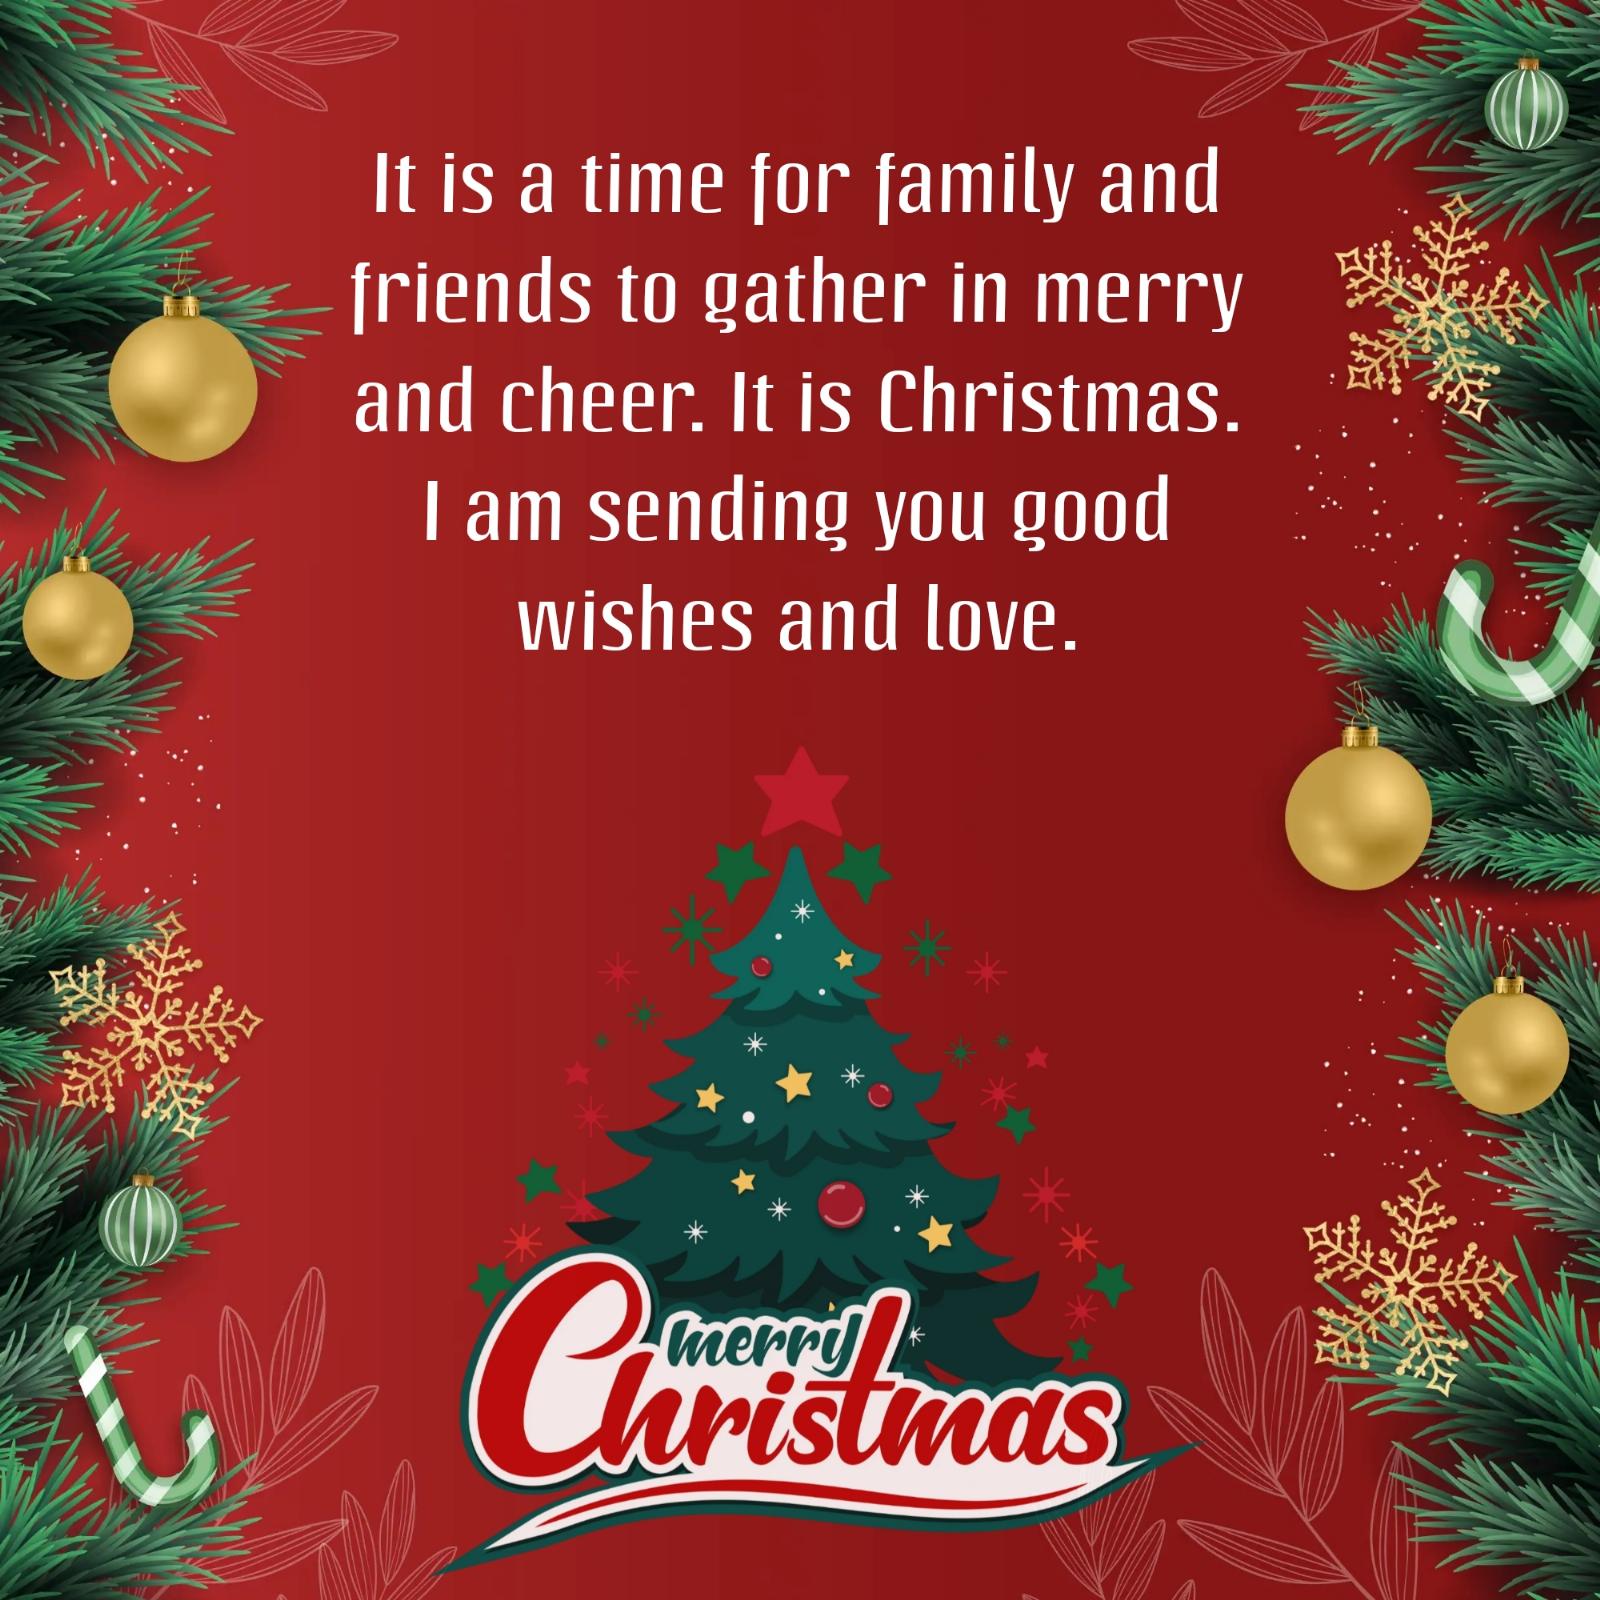 It is a time for family and friends to gather in merry and cheer